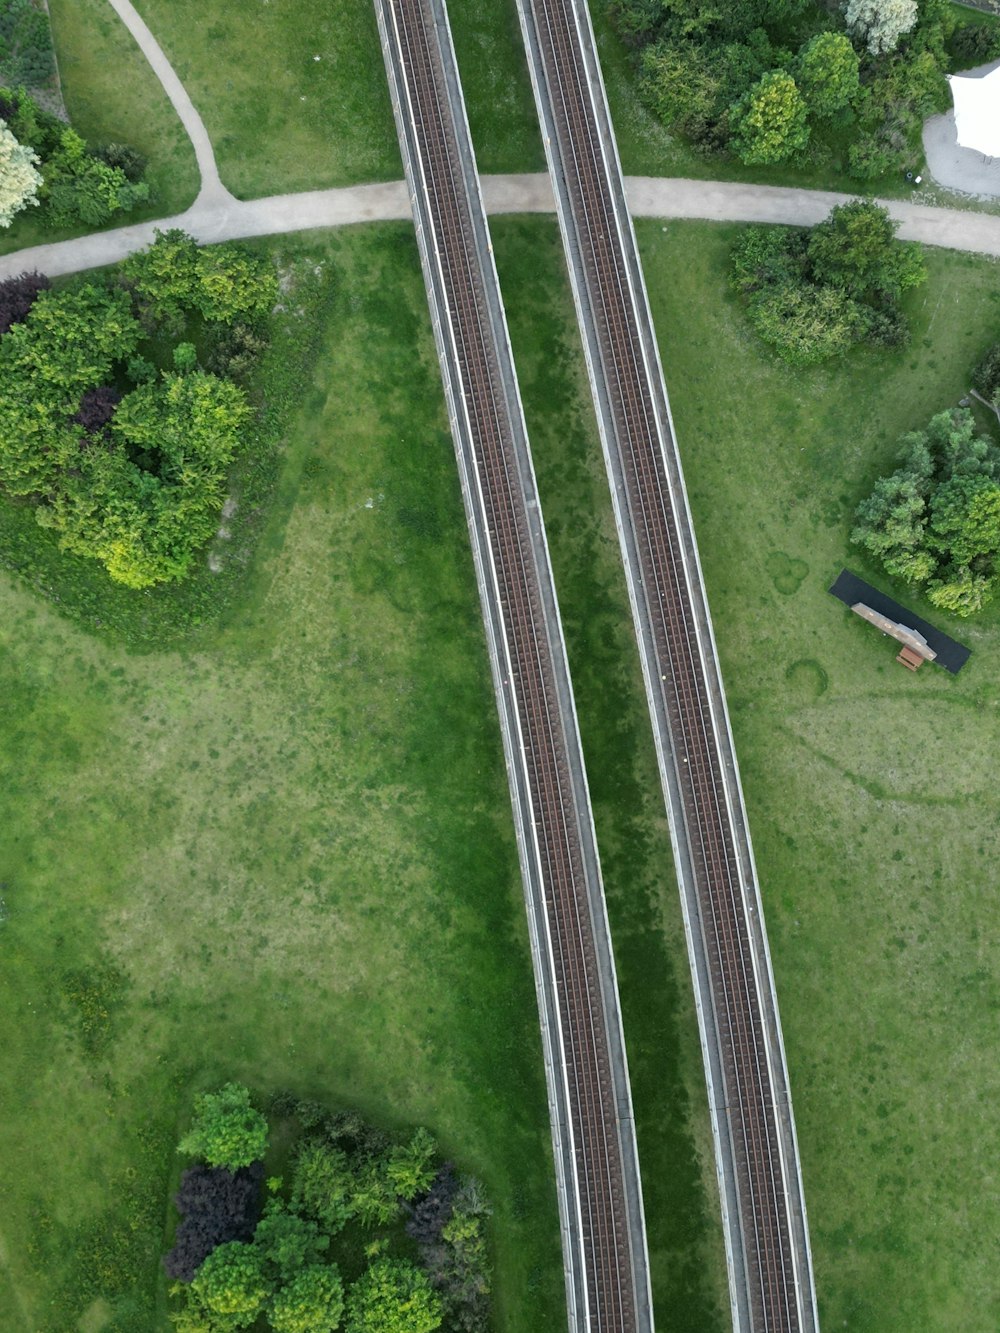 an aerial view of two railroad tracks in a grassy area